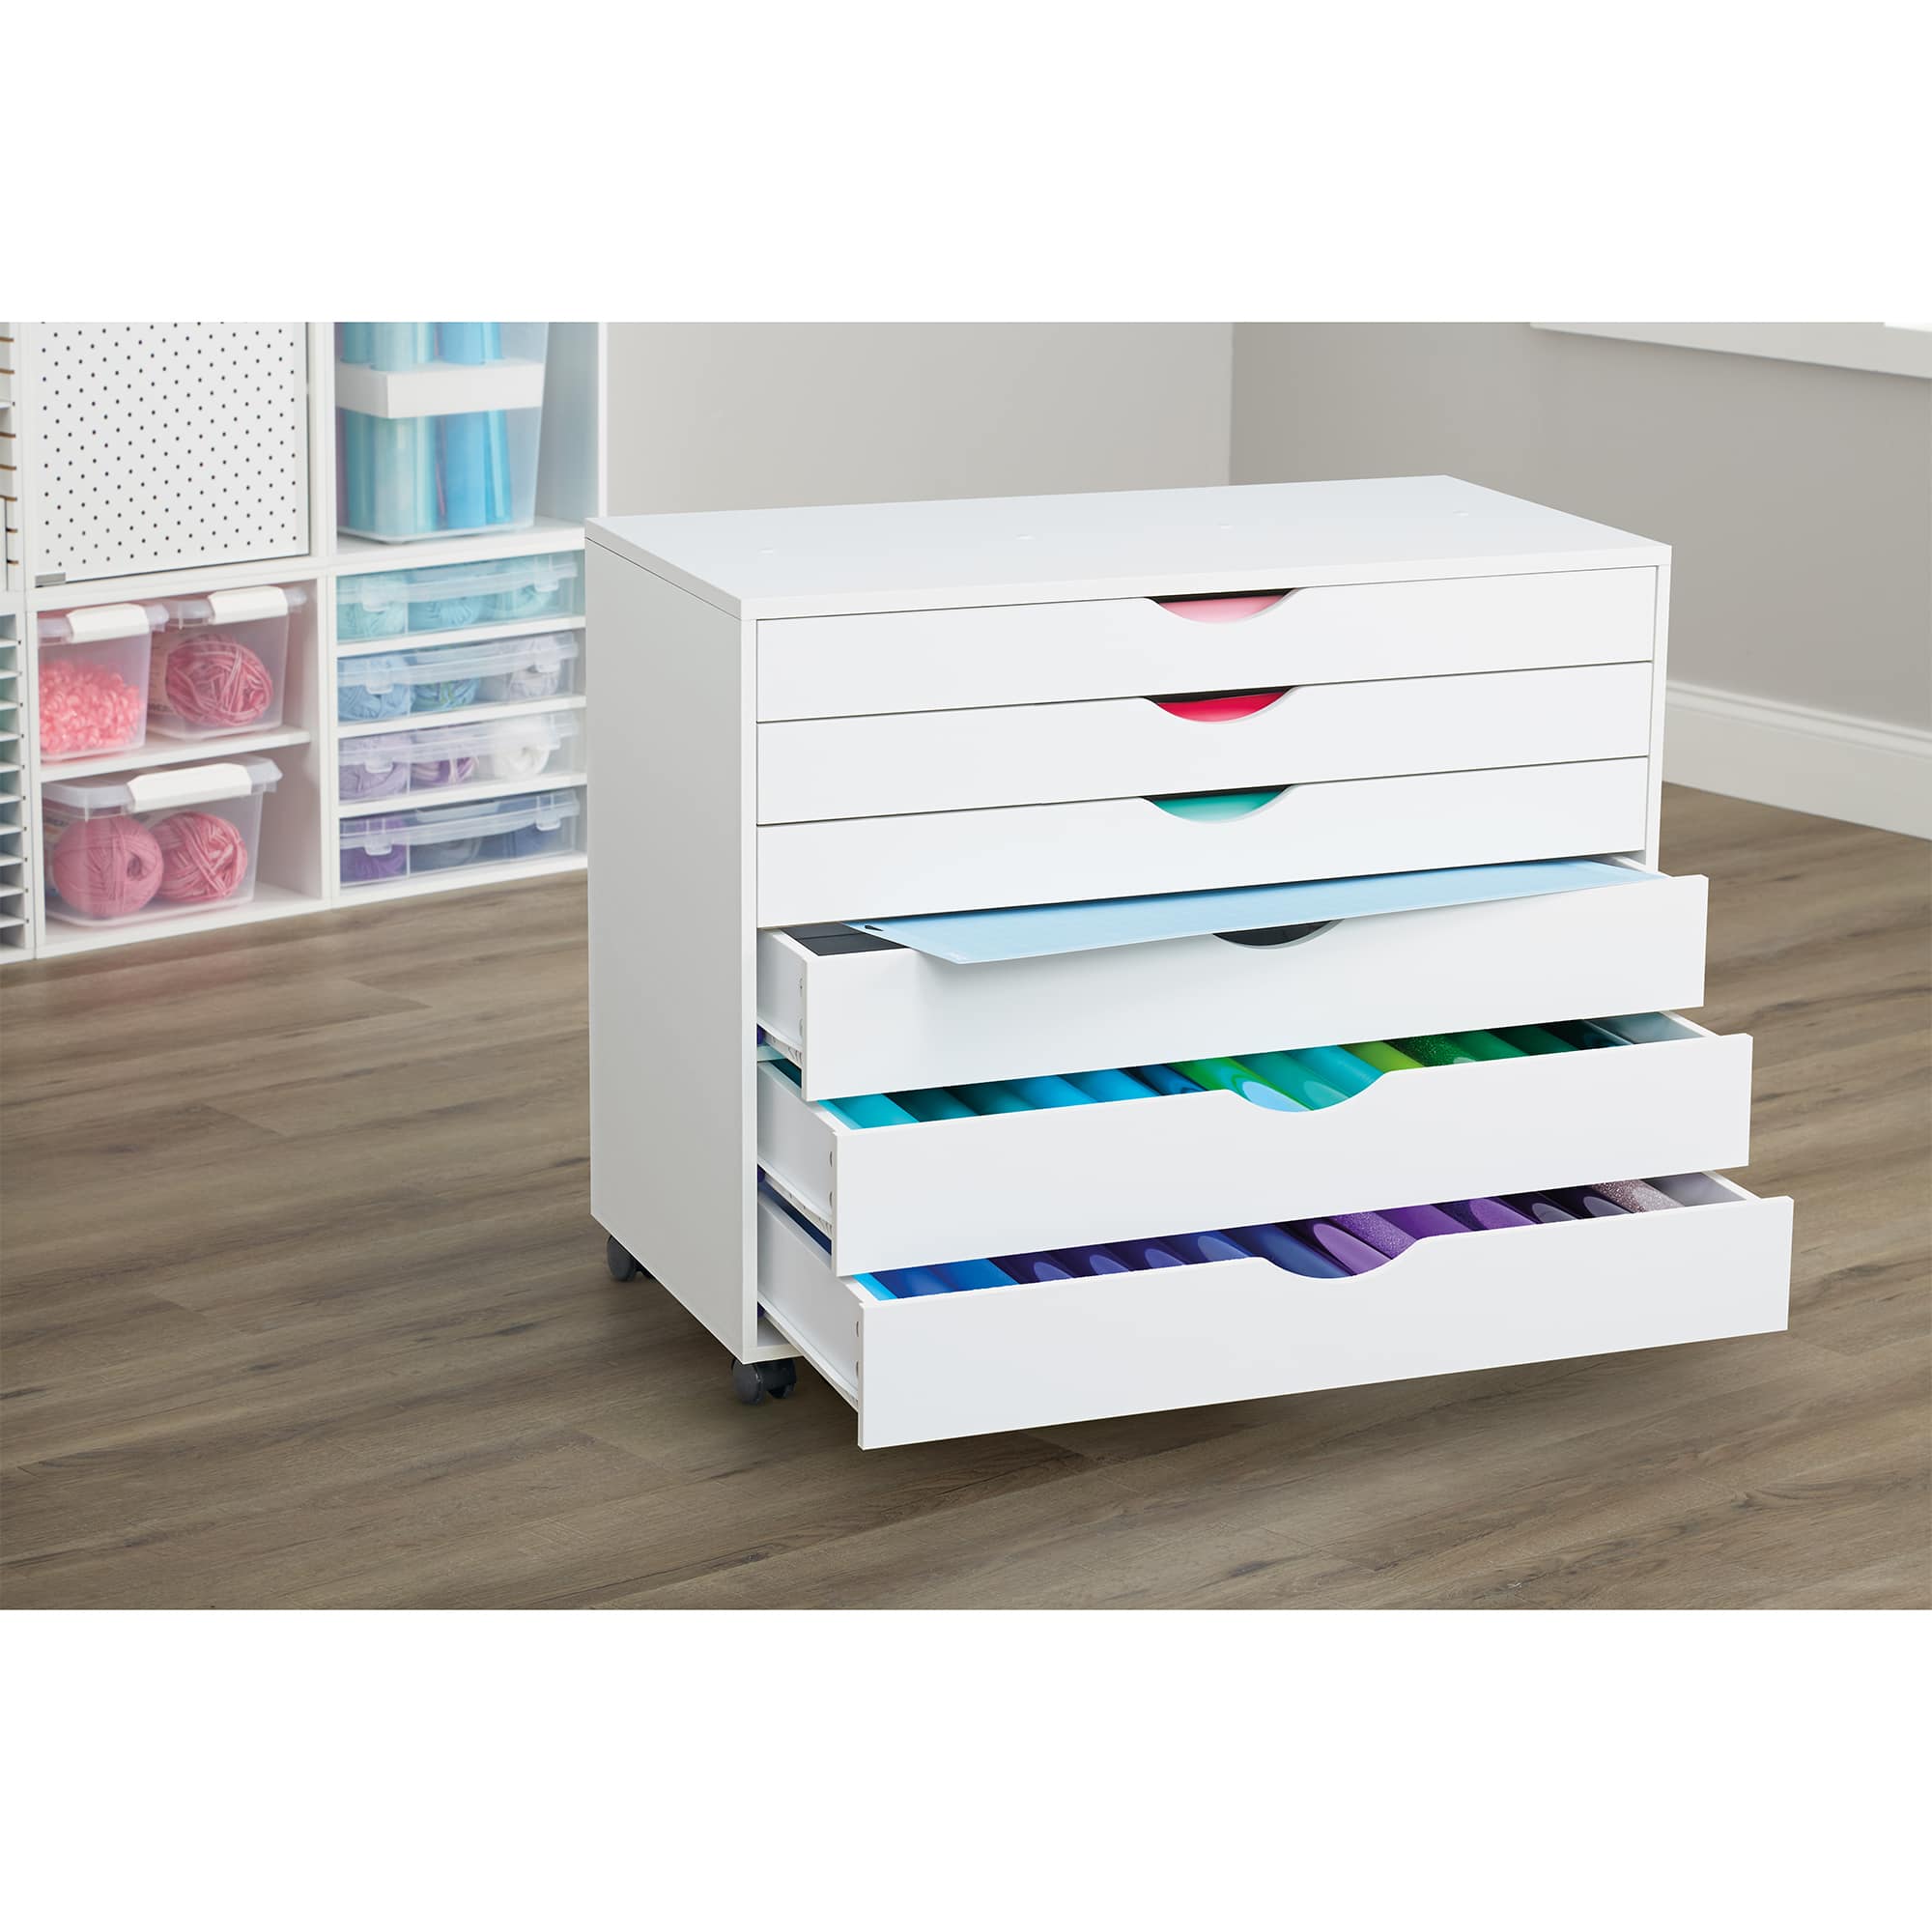 Let set up my new Modular Wide drawer by Simply Tidy from @michaelssto, Craft Room